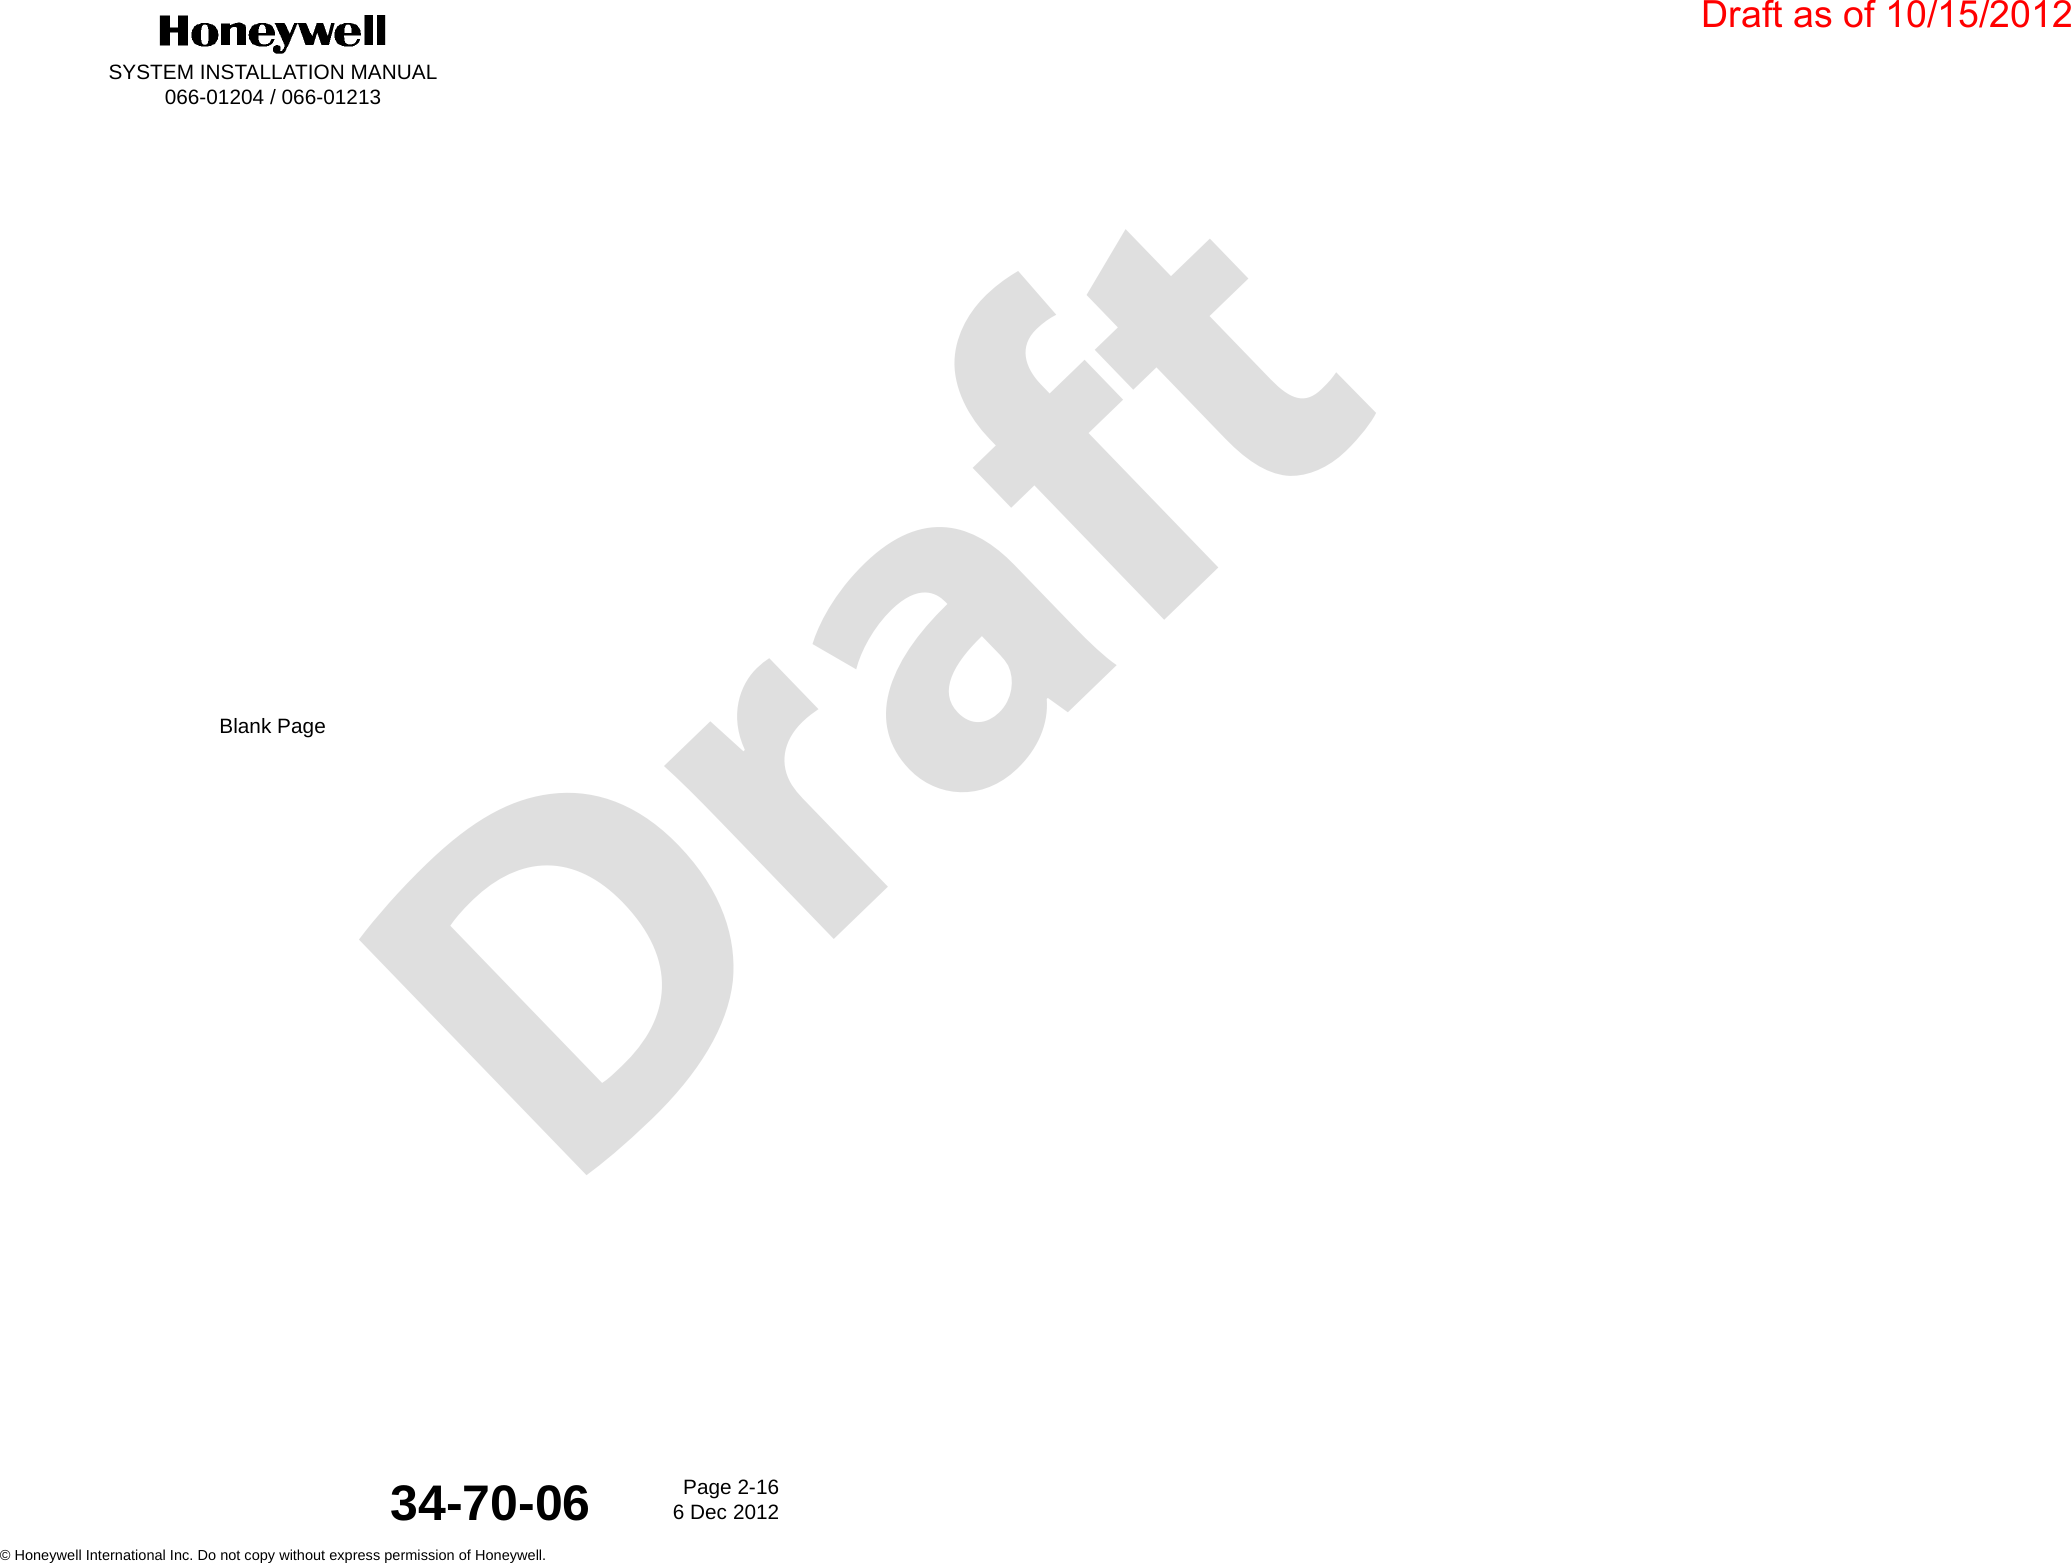 DraftSYSTEM INSTALLATION MANUAL066-01204 / 066-01213Page 2-166 Dec 2012© Honeywell International Inc. Do not copy without express permission of Honeywell.34-70-06Blank PageDraft as of 10/15/2012